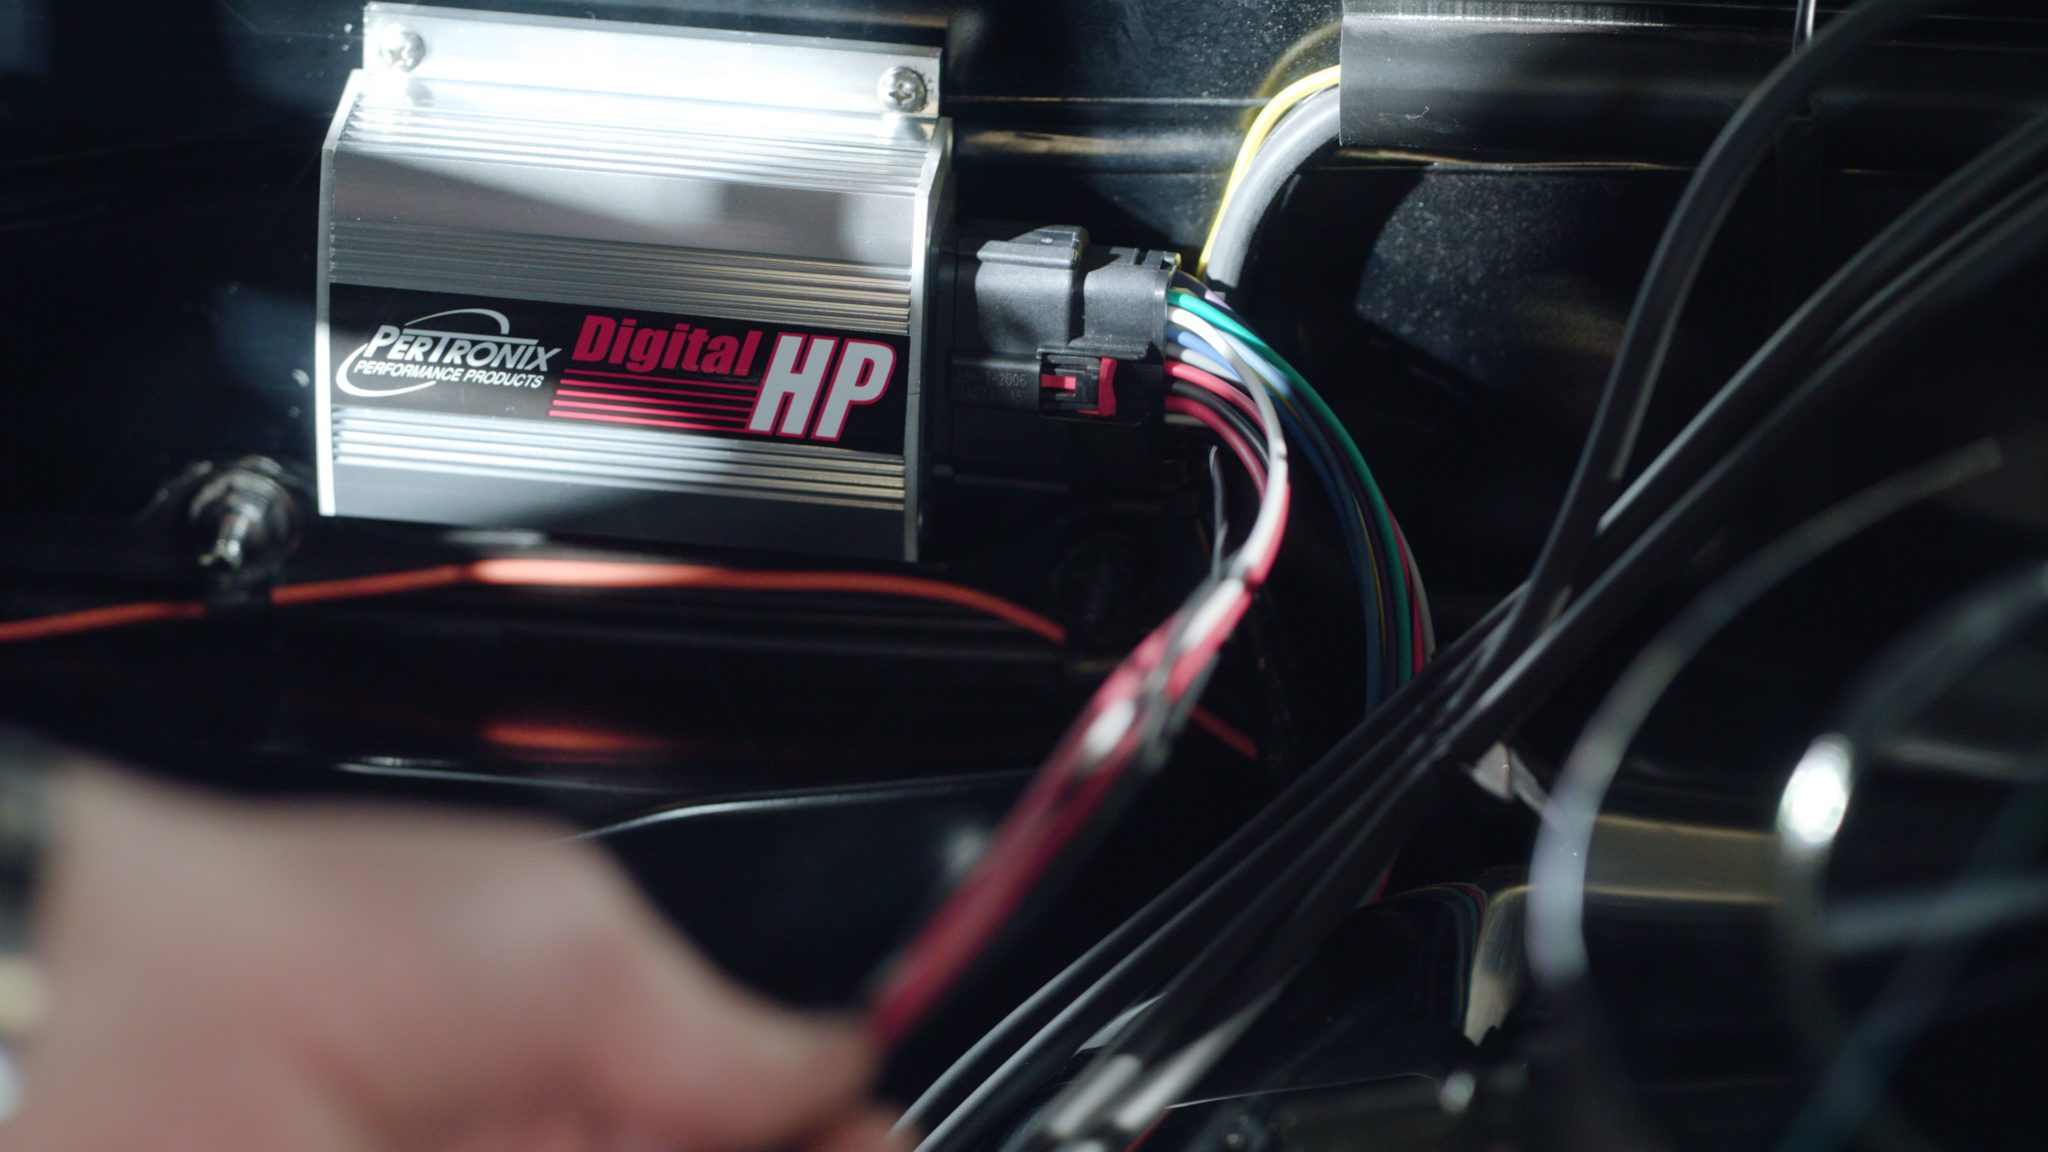 Video: How to install PerTronix Digital HP Ignition Box